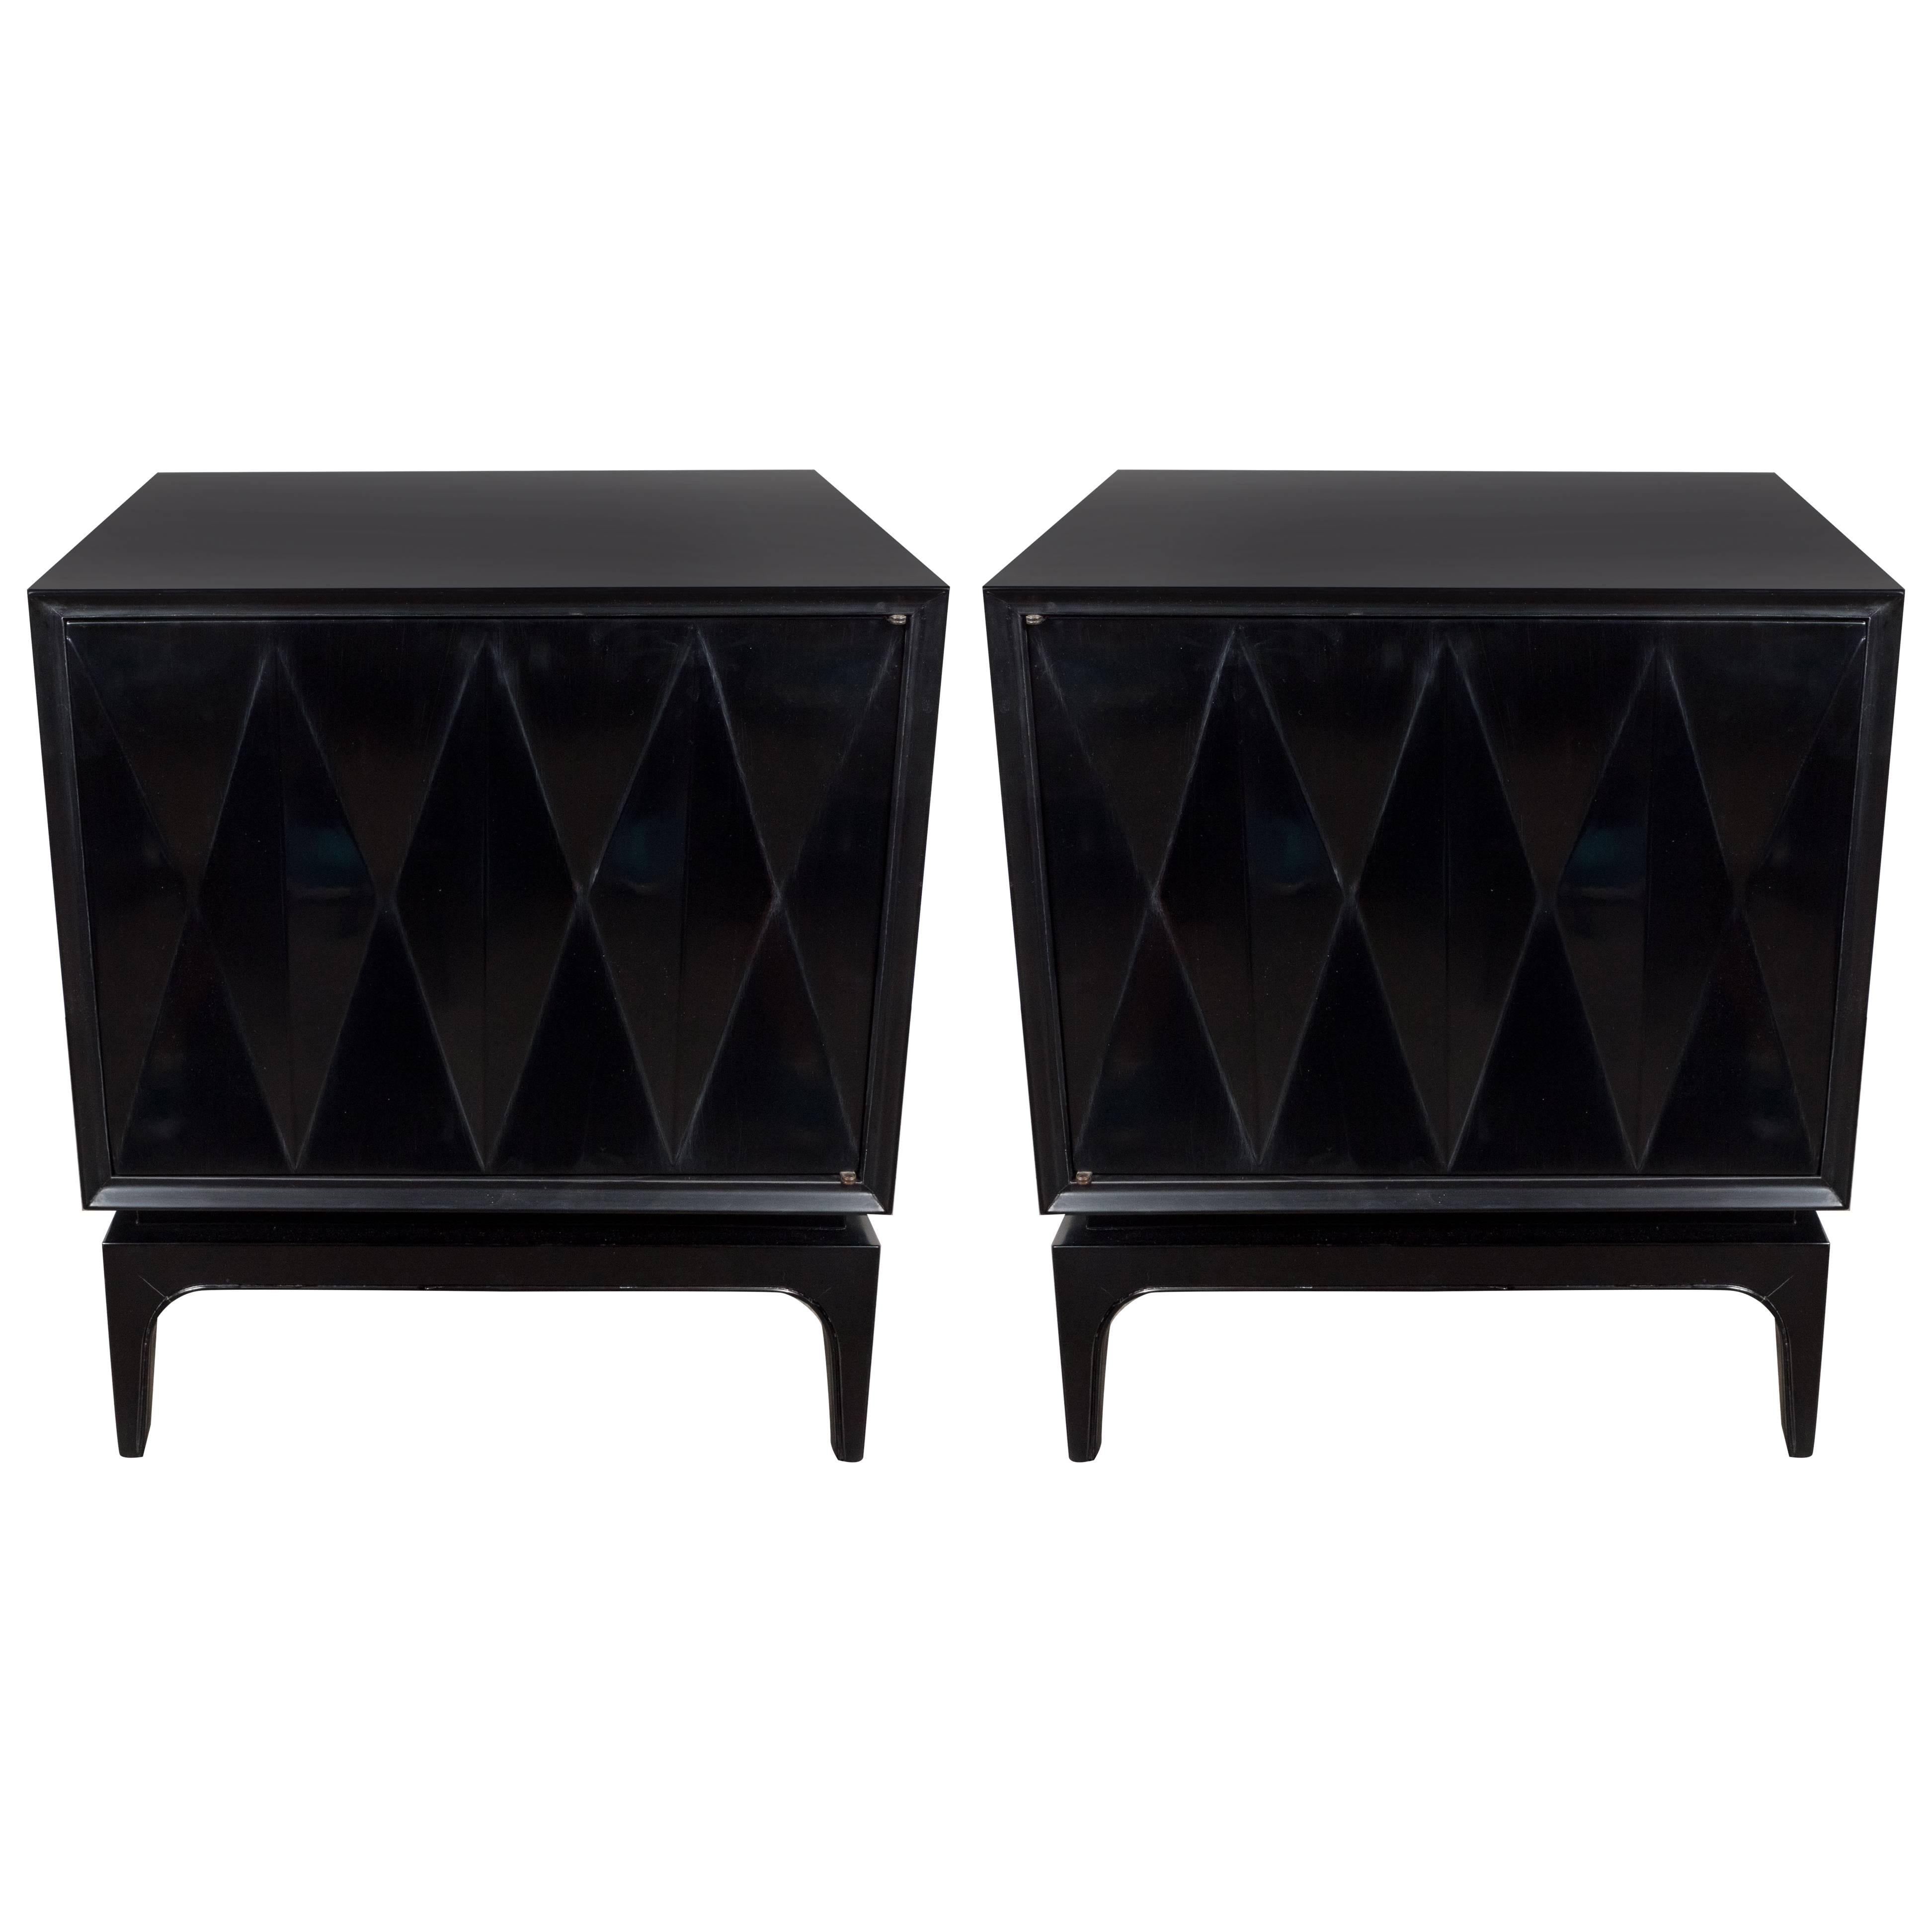 Sculptural Pair of Ebonized Walnut Nightstands or End Tables with Diamond Front